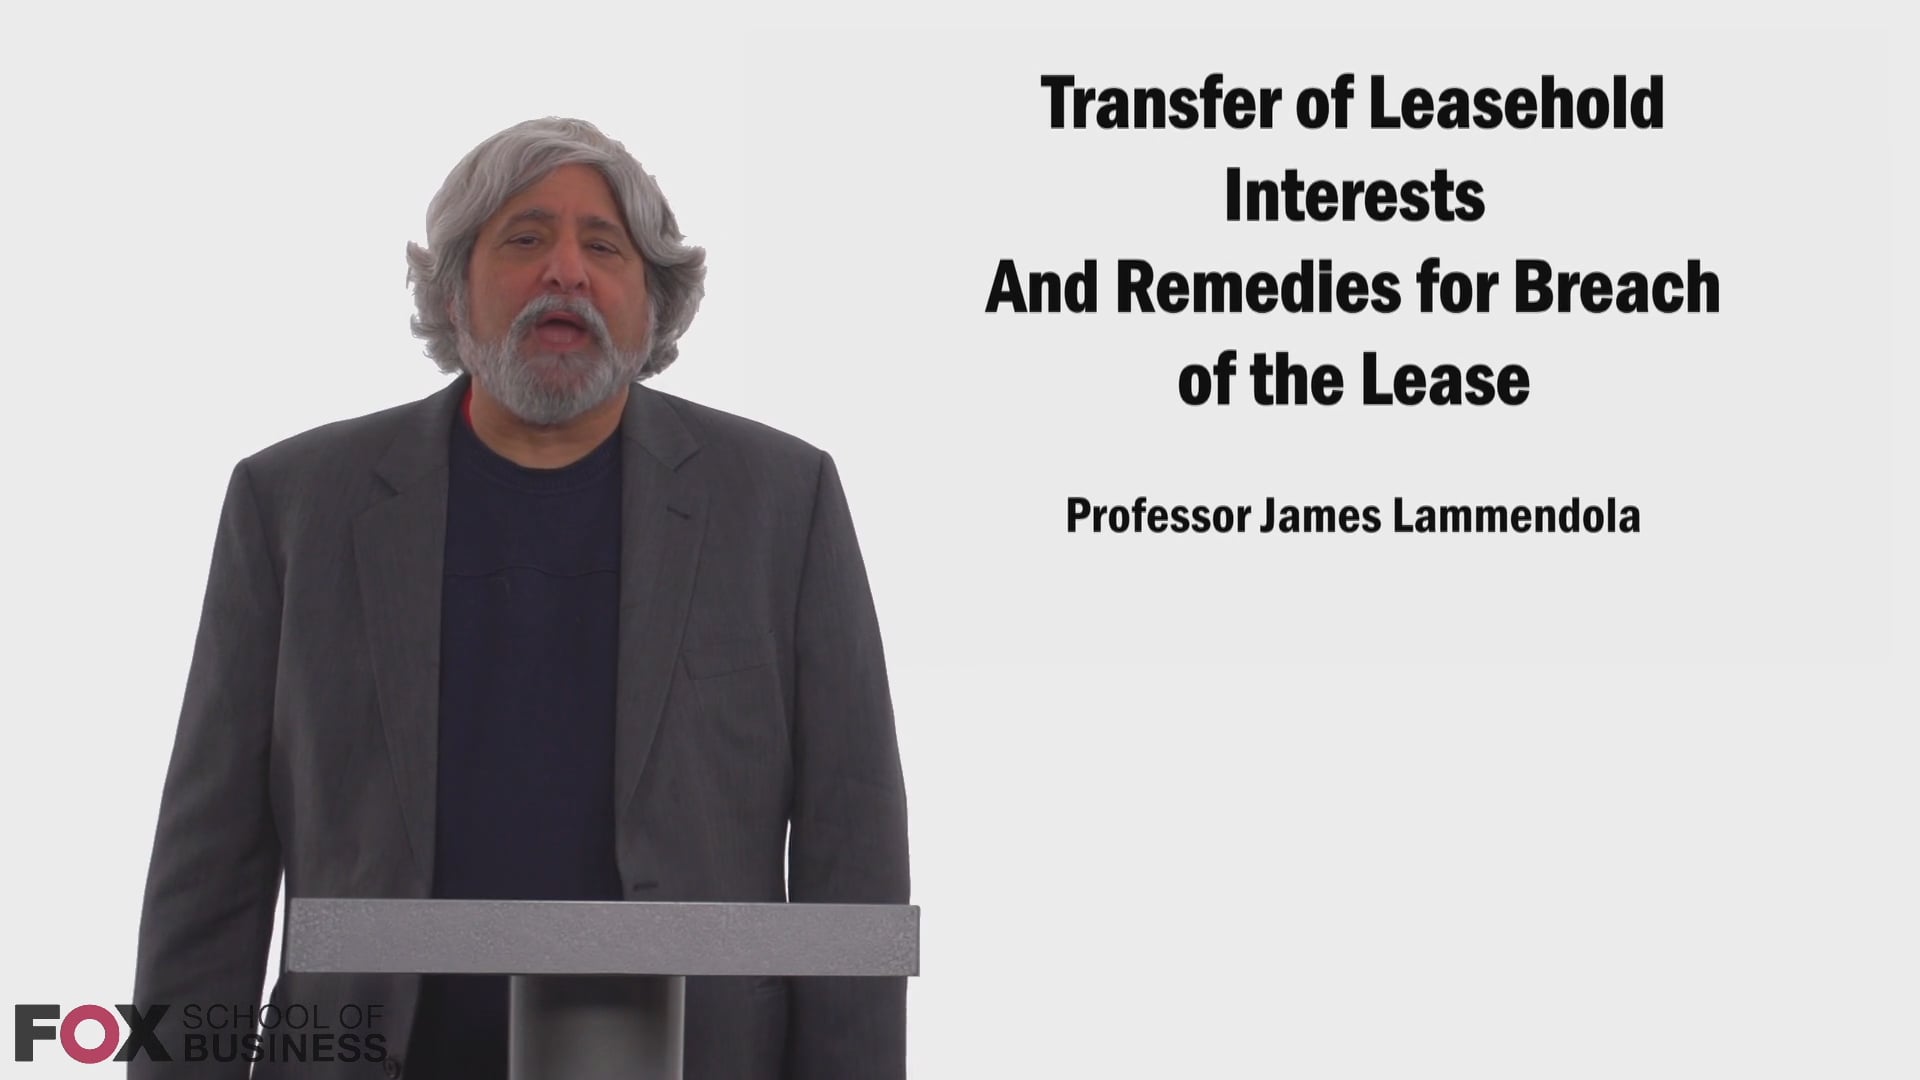 Transfer of Leasehold Interests and Remedies for Breach of the Lease